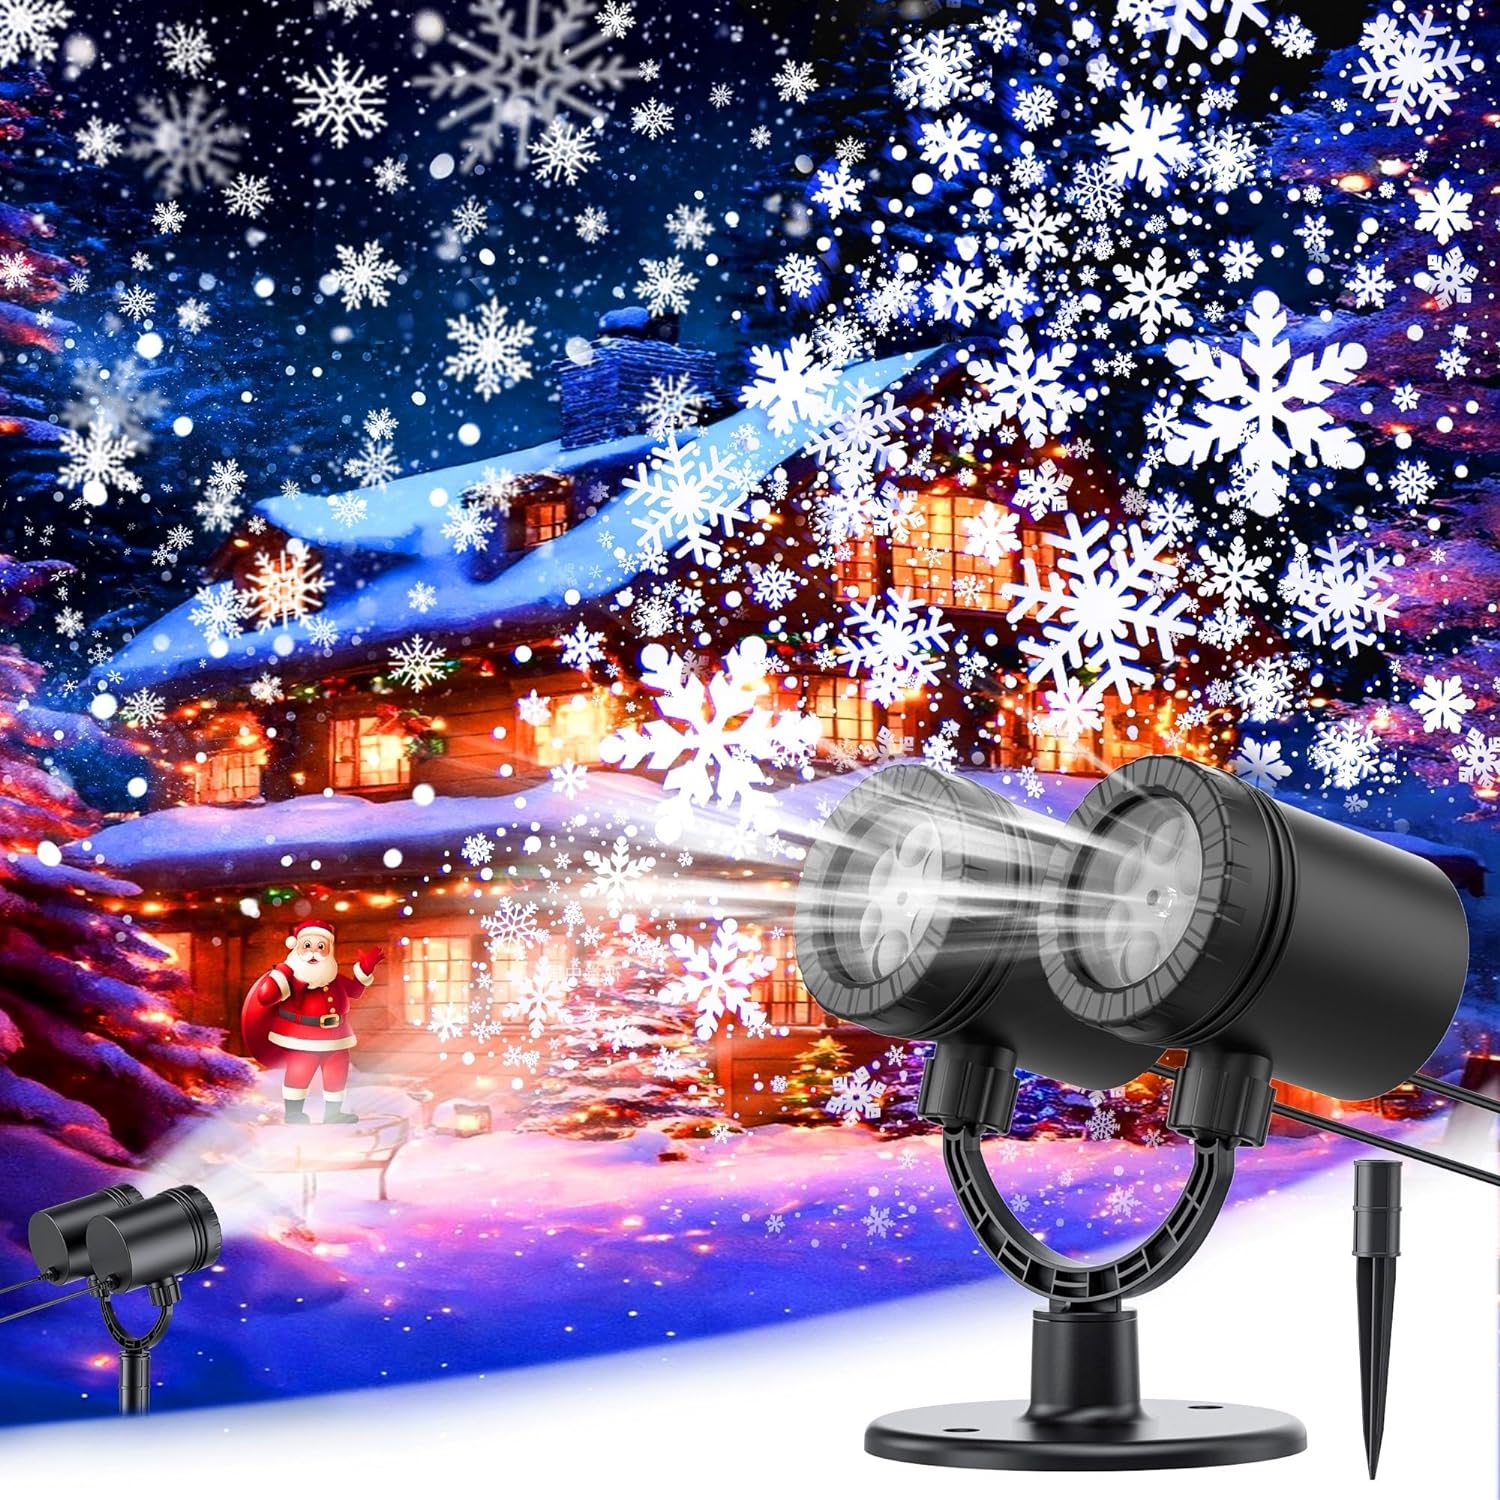 Snowflake Christmas Projector Lights Outdoor GUSODOR Christmas Decorations, Double-Head LED Waterproof, Snowflake Christmas Projector, Xmas Party Holiday Decorations for Outdoor Indoor,Yard